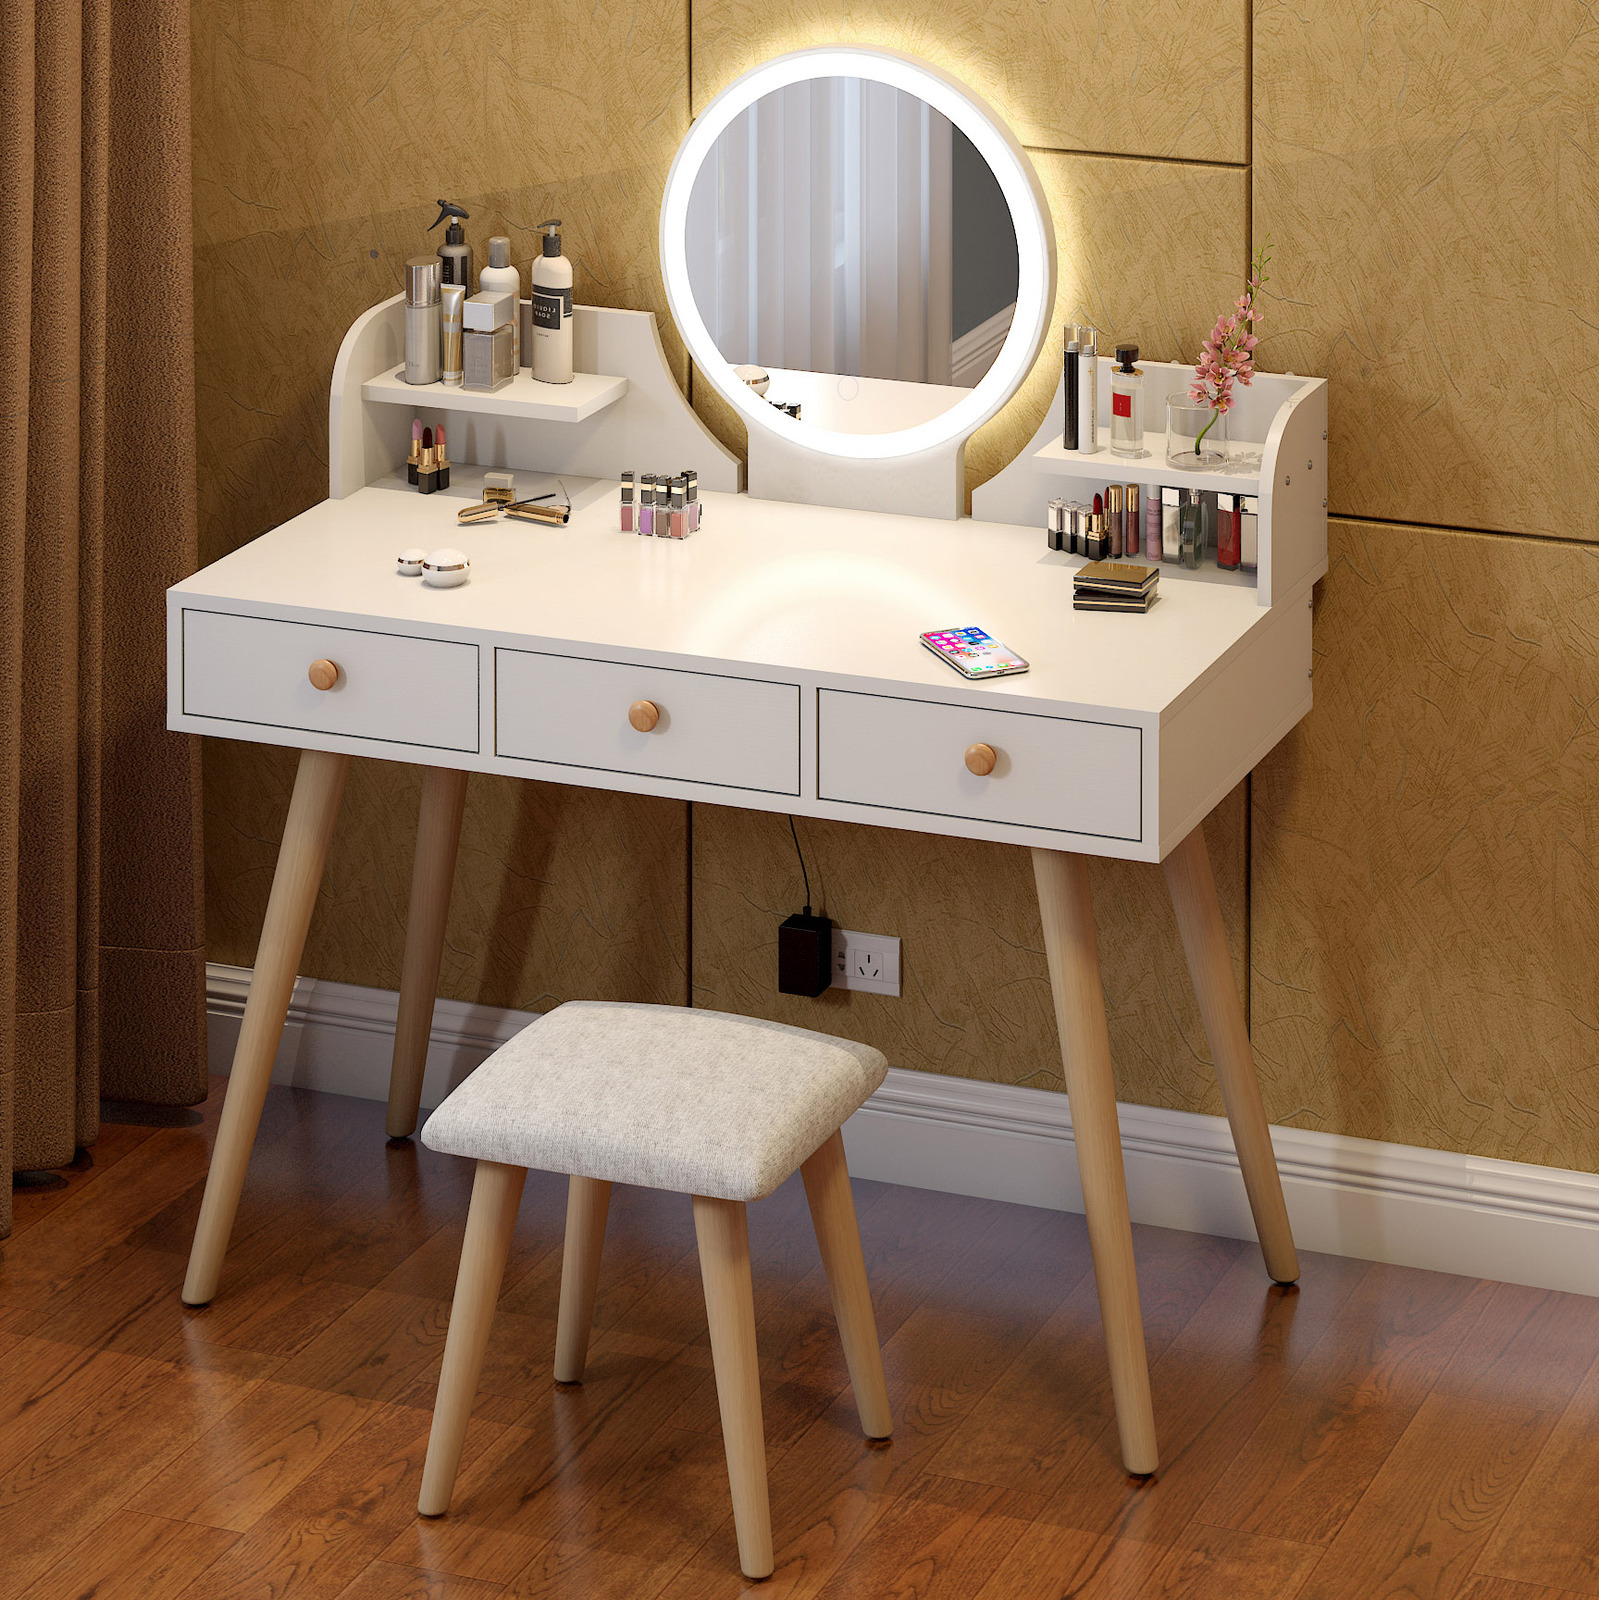 Led Luminous Large Dresser Table With, Replacement Mirror For Dressing Table